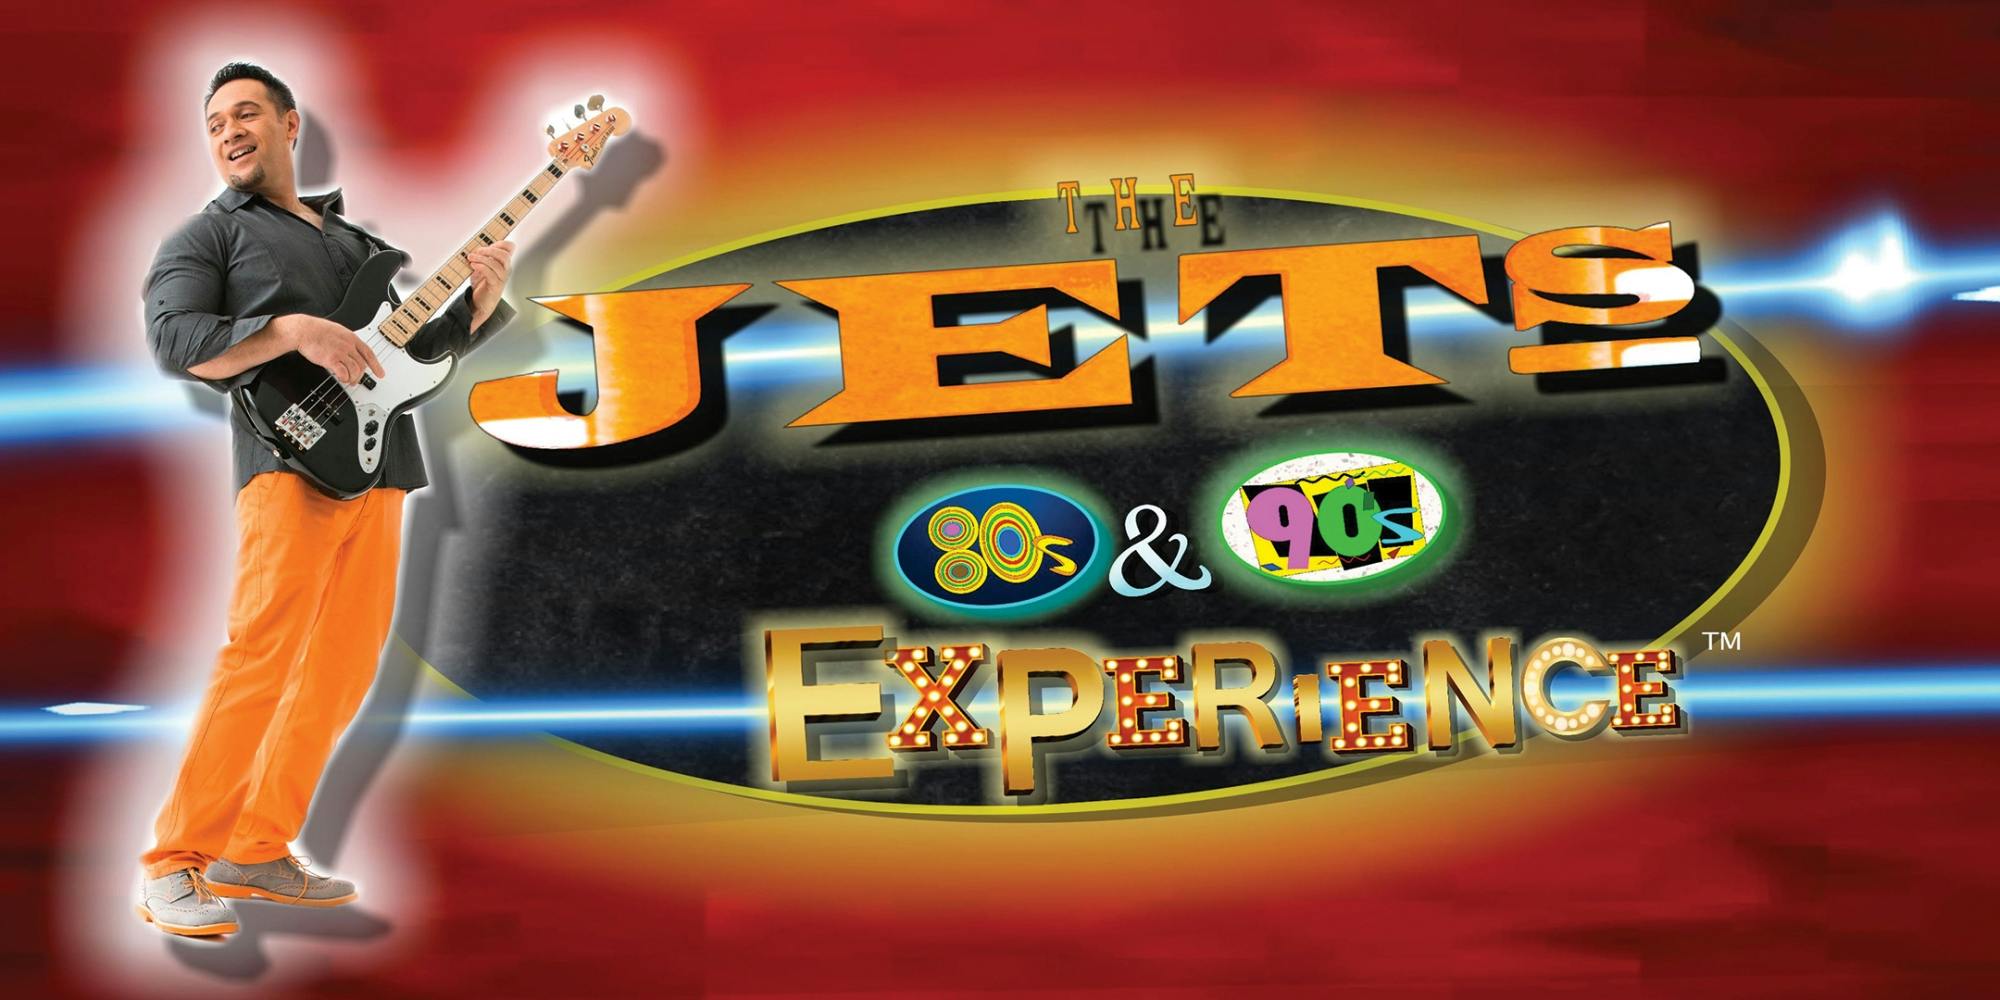 The Jets 80s and 90s experience Musement